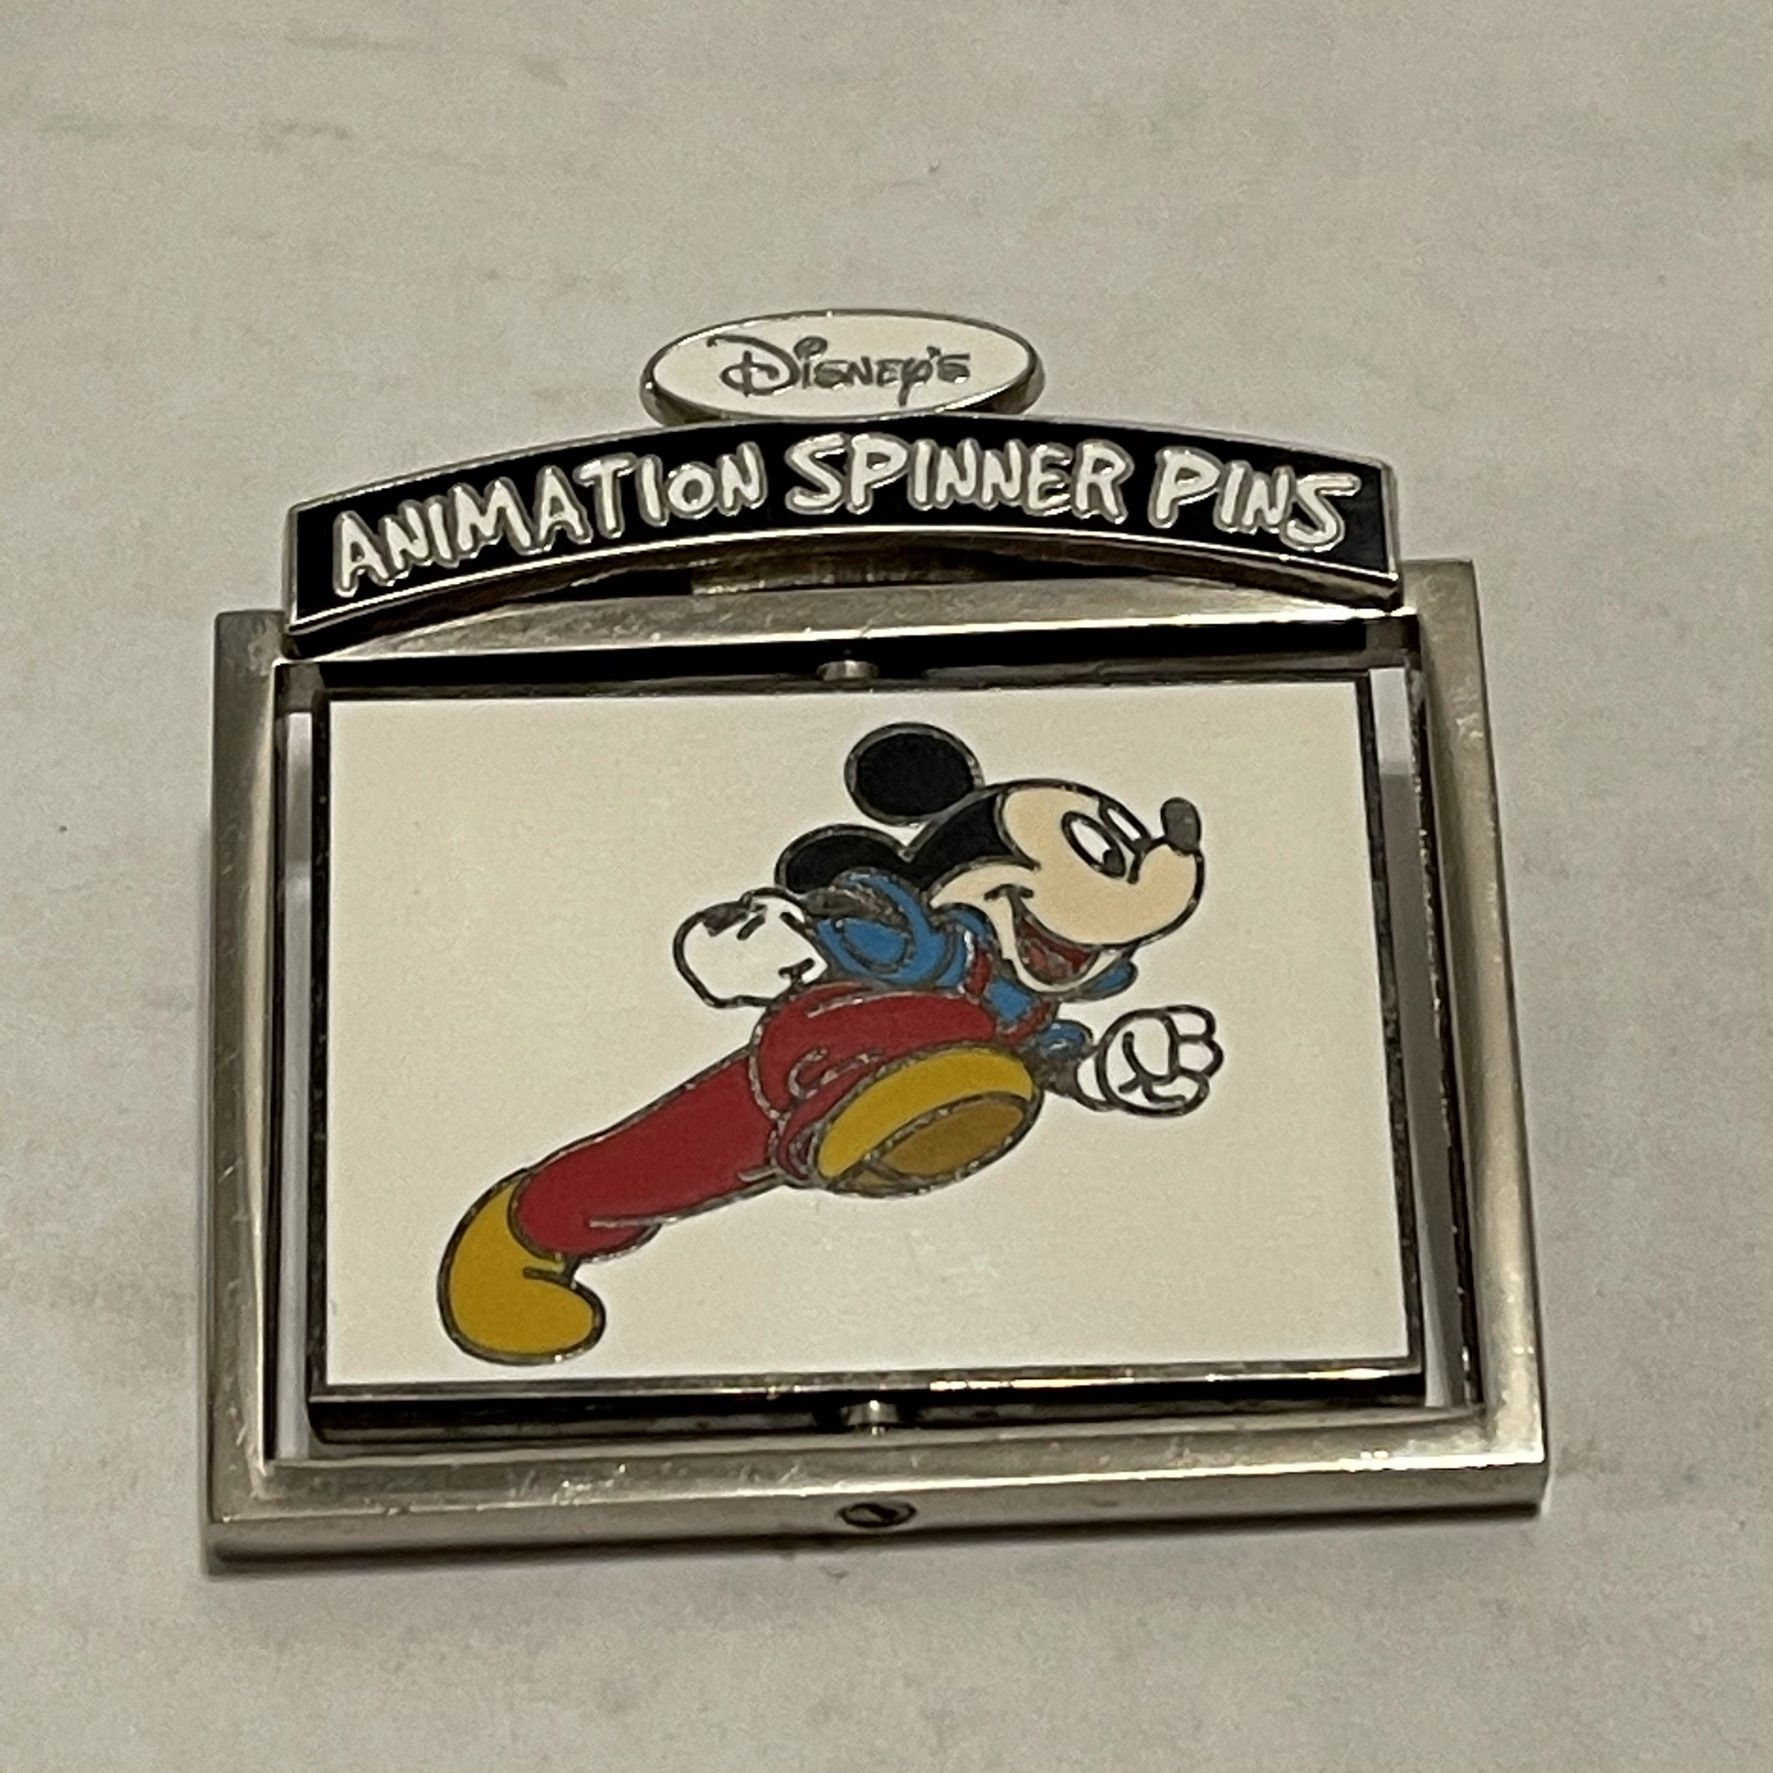 Mickey Mouse pin DCA 2003 Disney's Animation Spinner Pins collection LE1500